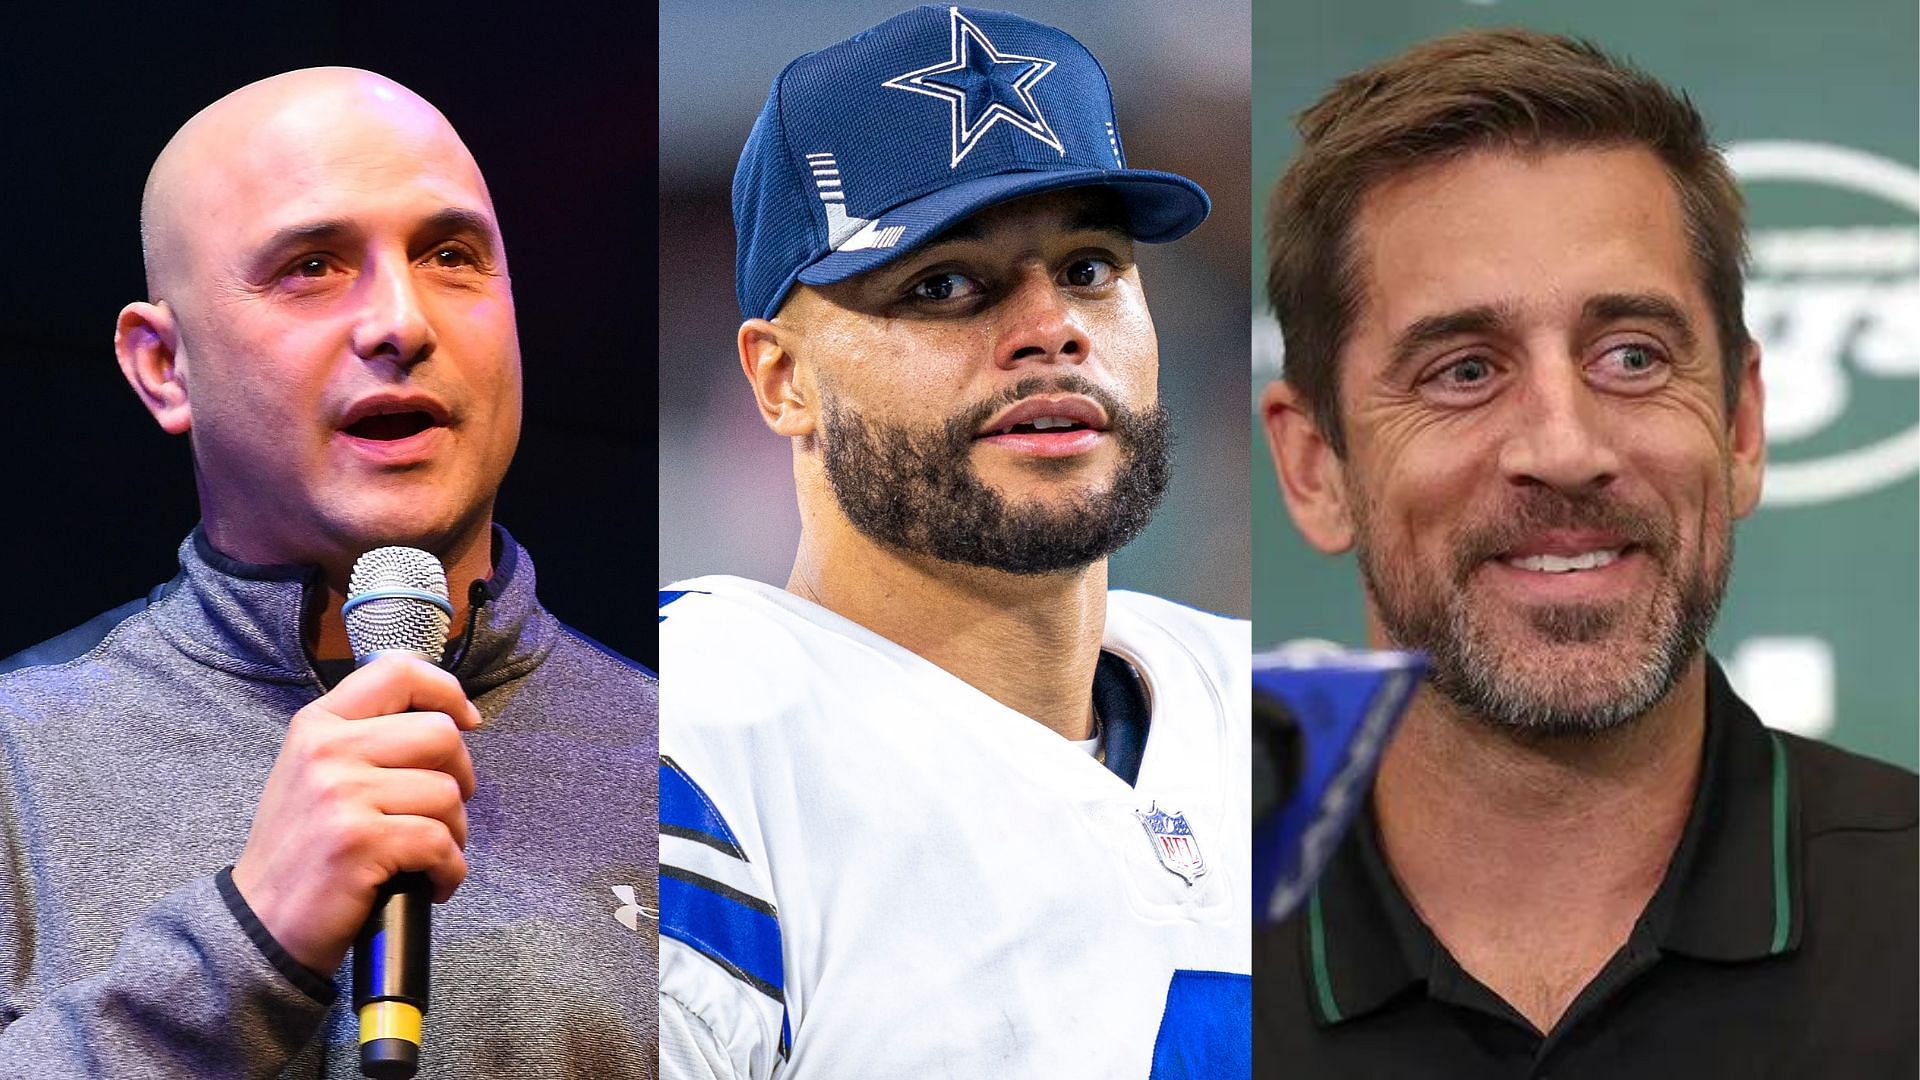 Craig Carton (L) comments on Madden 24 rating on QBs Dak Prescott (C) and Aaron Rodgers (R)